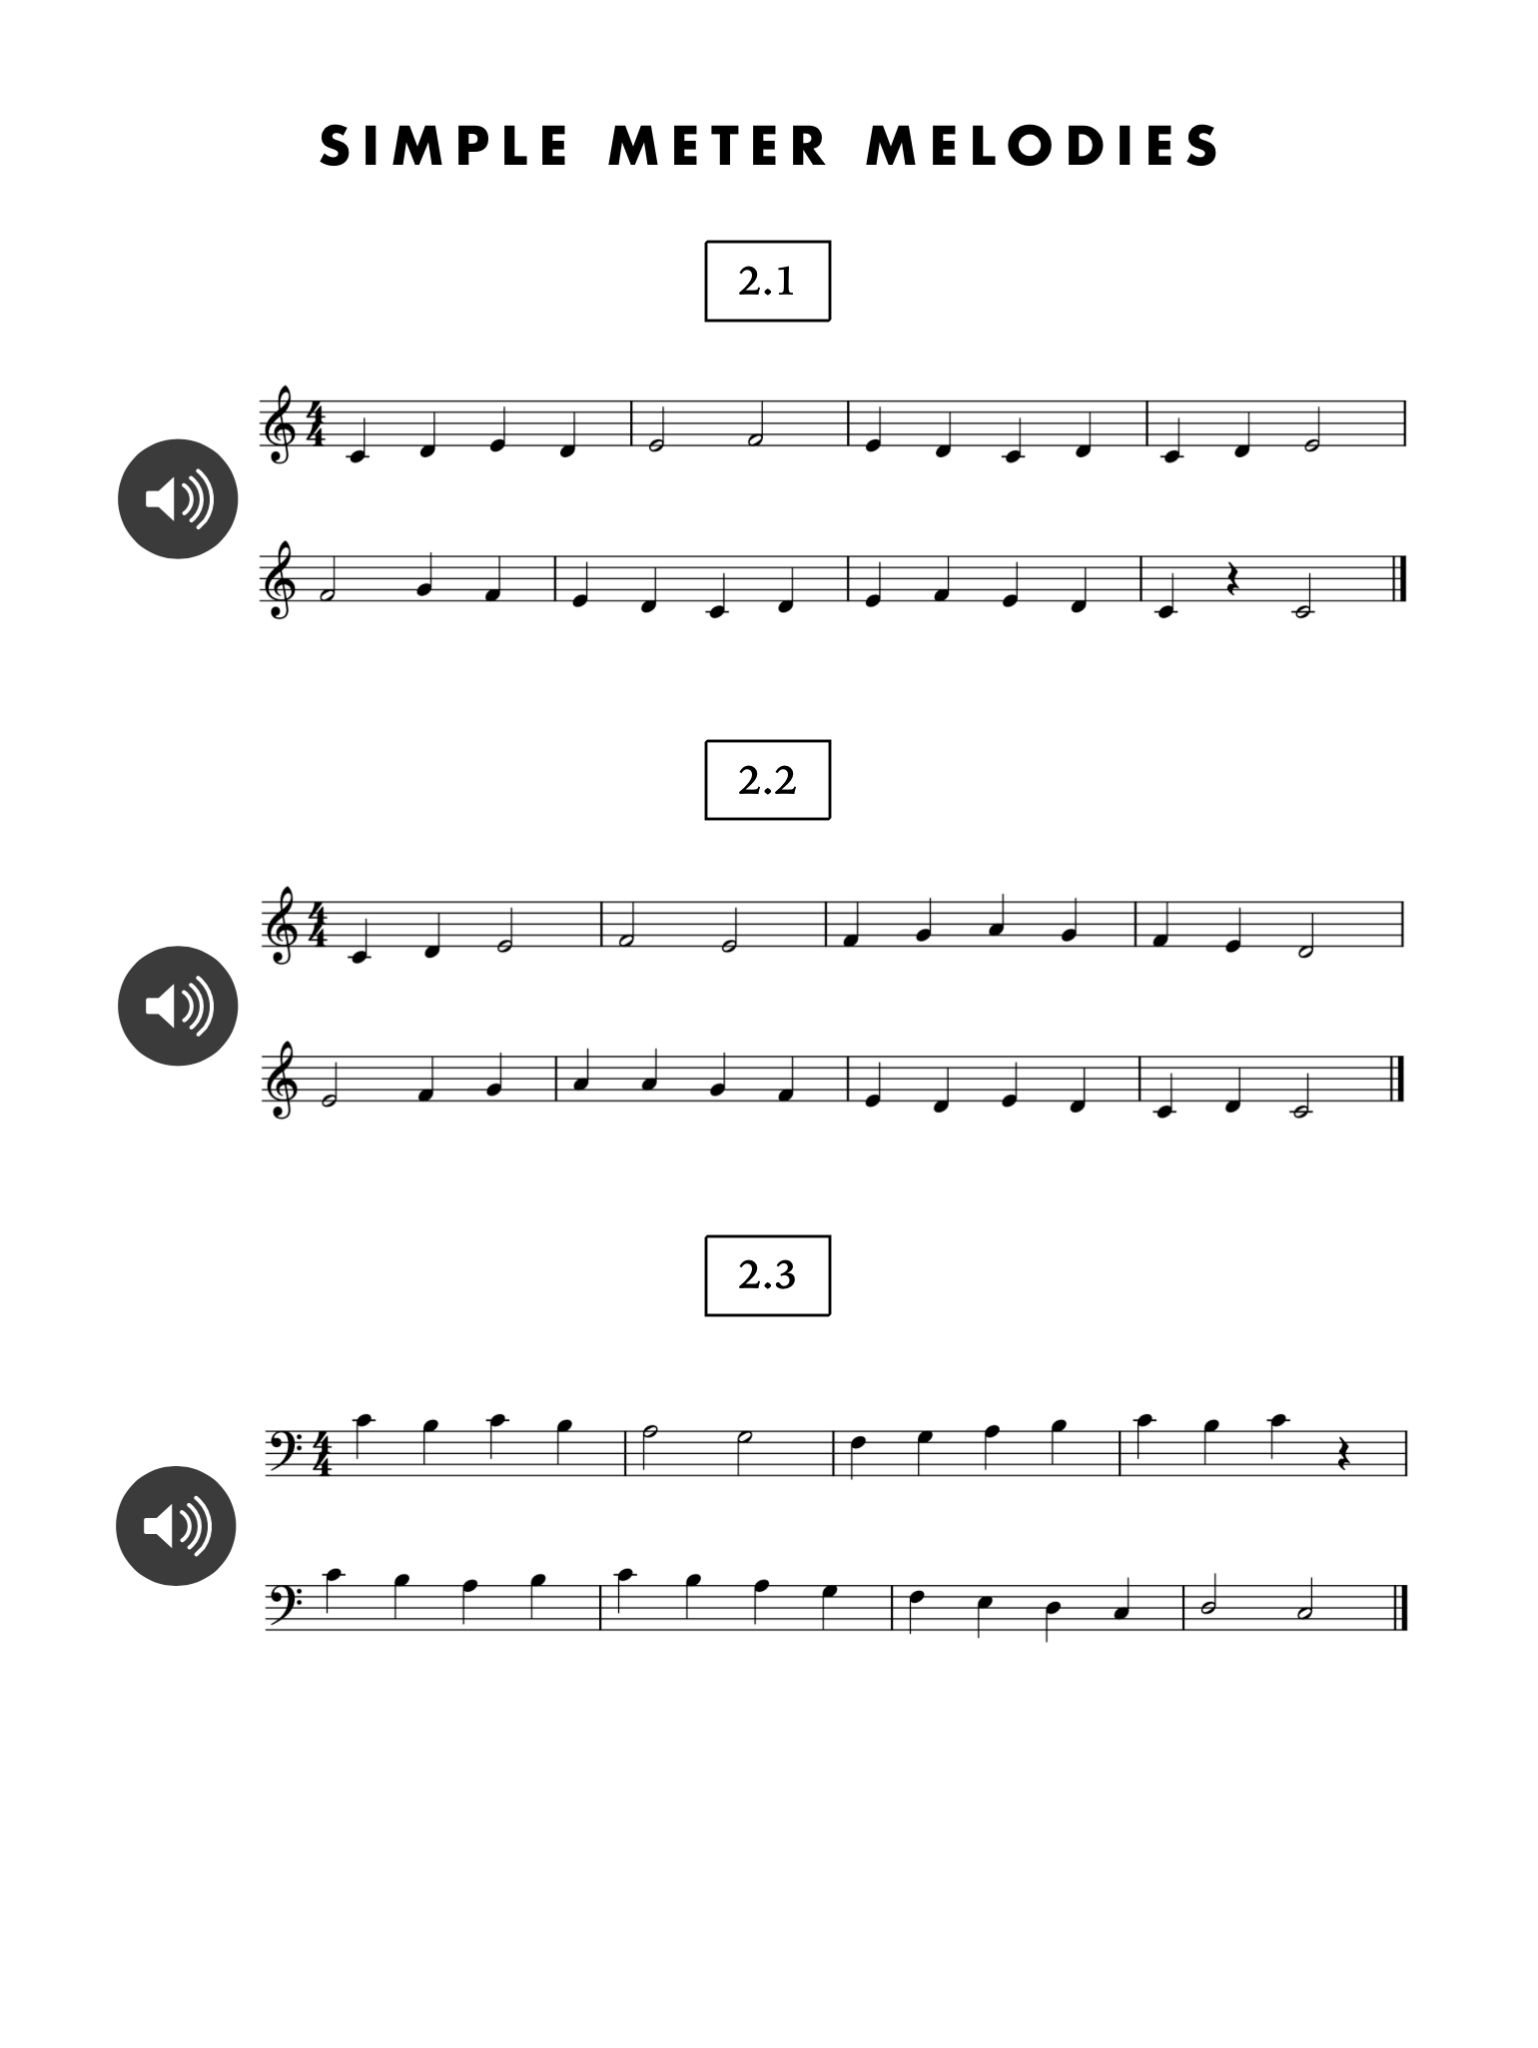 First page of the Simple Meter Melodies chapter.